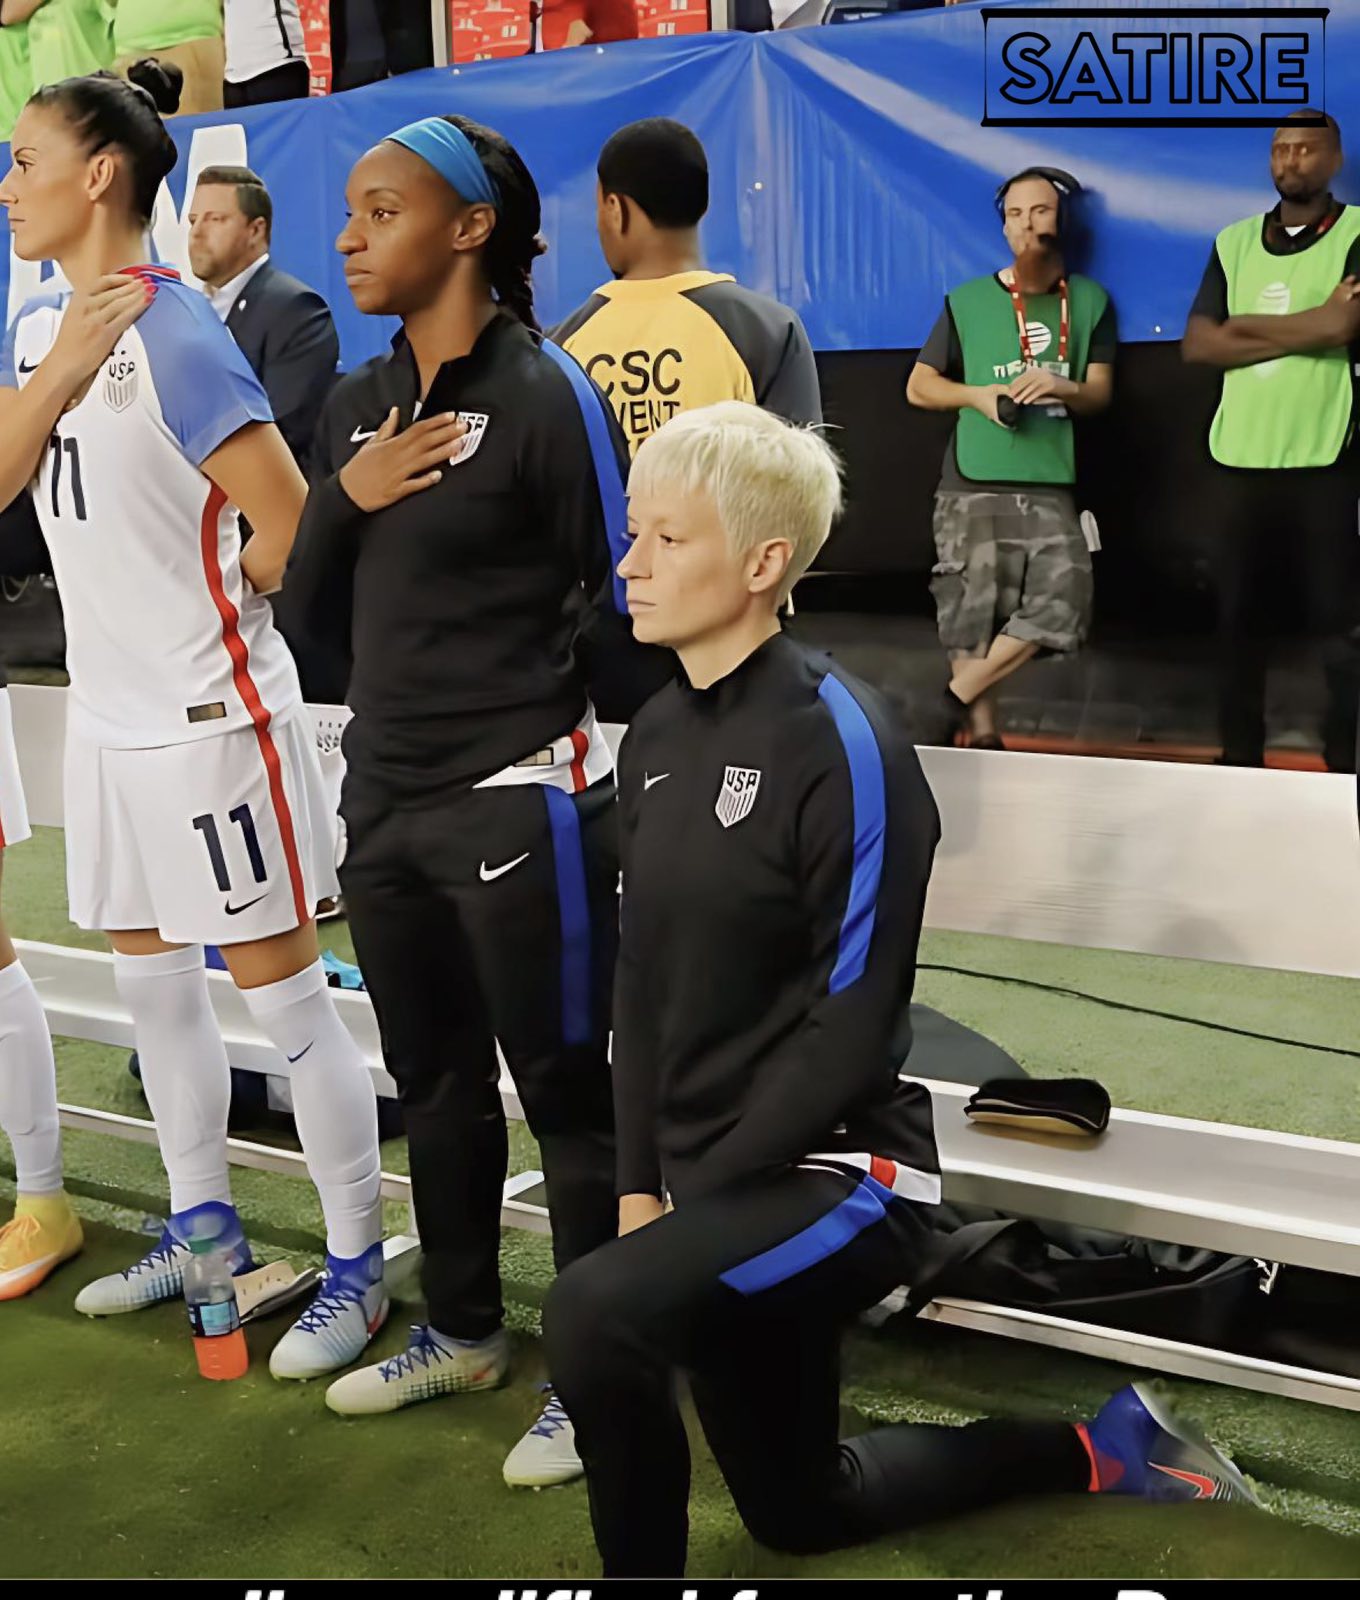 Megan Rapinoe has been disqualified from the Pro Soccer Hall of Fame due to her controversial actions and statements, with critics labeling her as a poor role model.